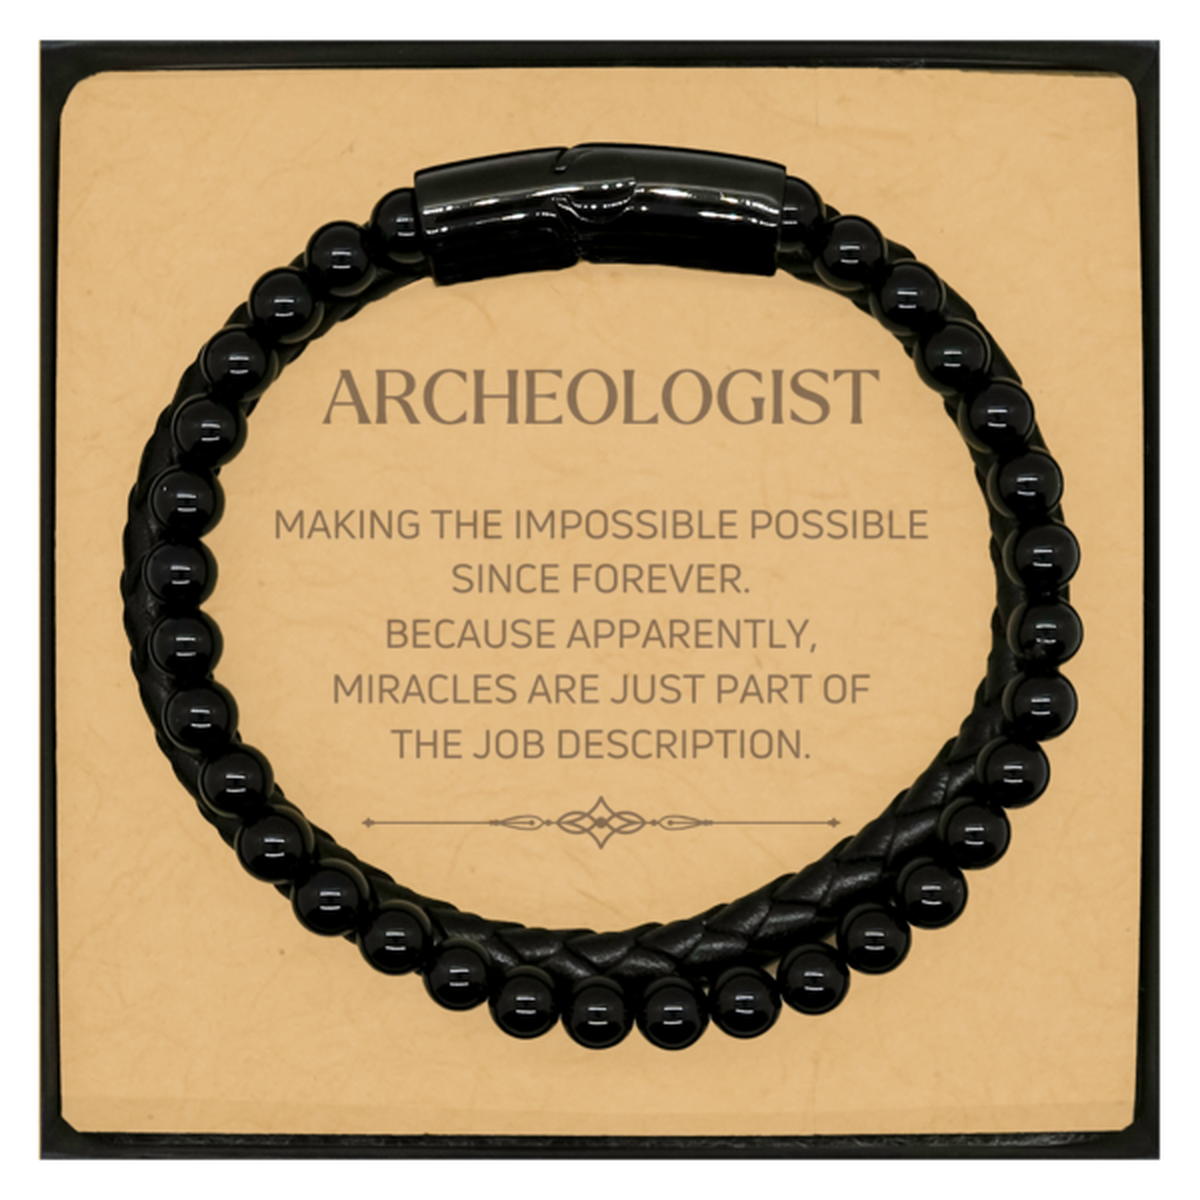 Funny Archeologist Gifts, Miracles are just part of the job description, Inspirational Birthday Christmas Stone Leather Bracelets For Archeologist, Men, Women, Coworkers, Friends, Boss